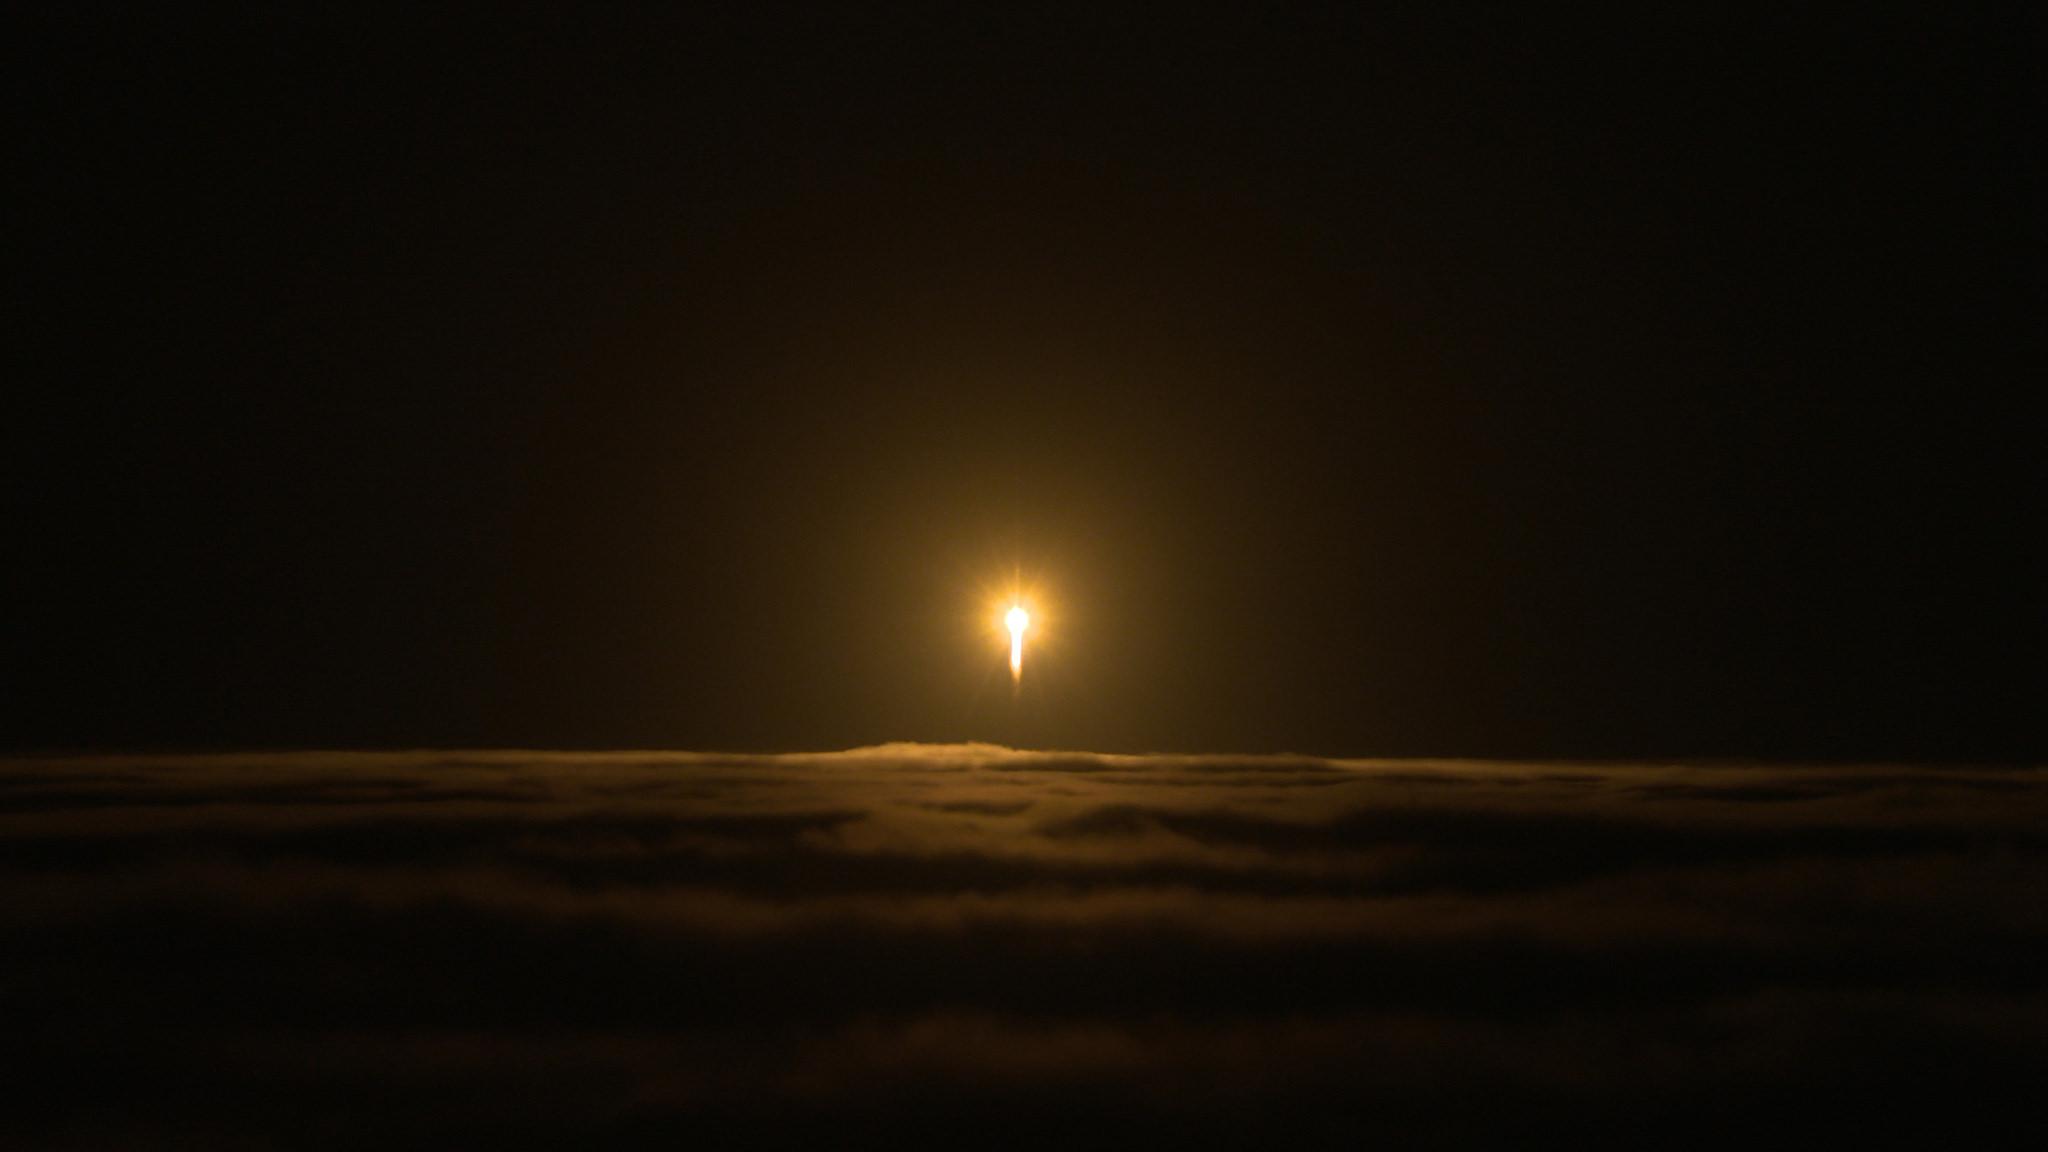 PIA22542: InSight Launches Through Clouds